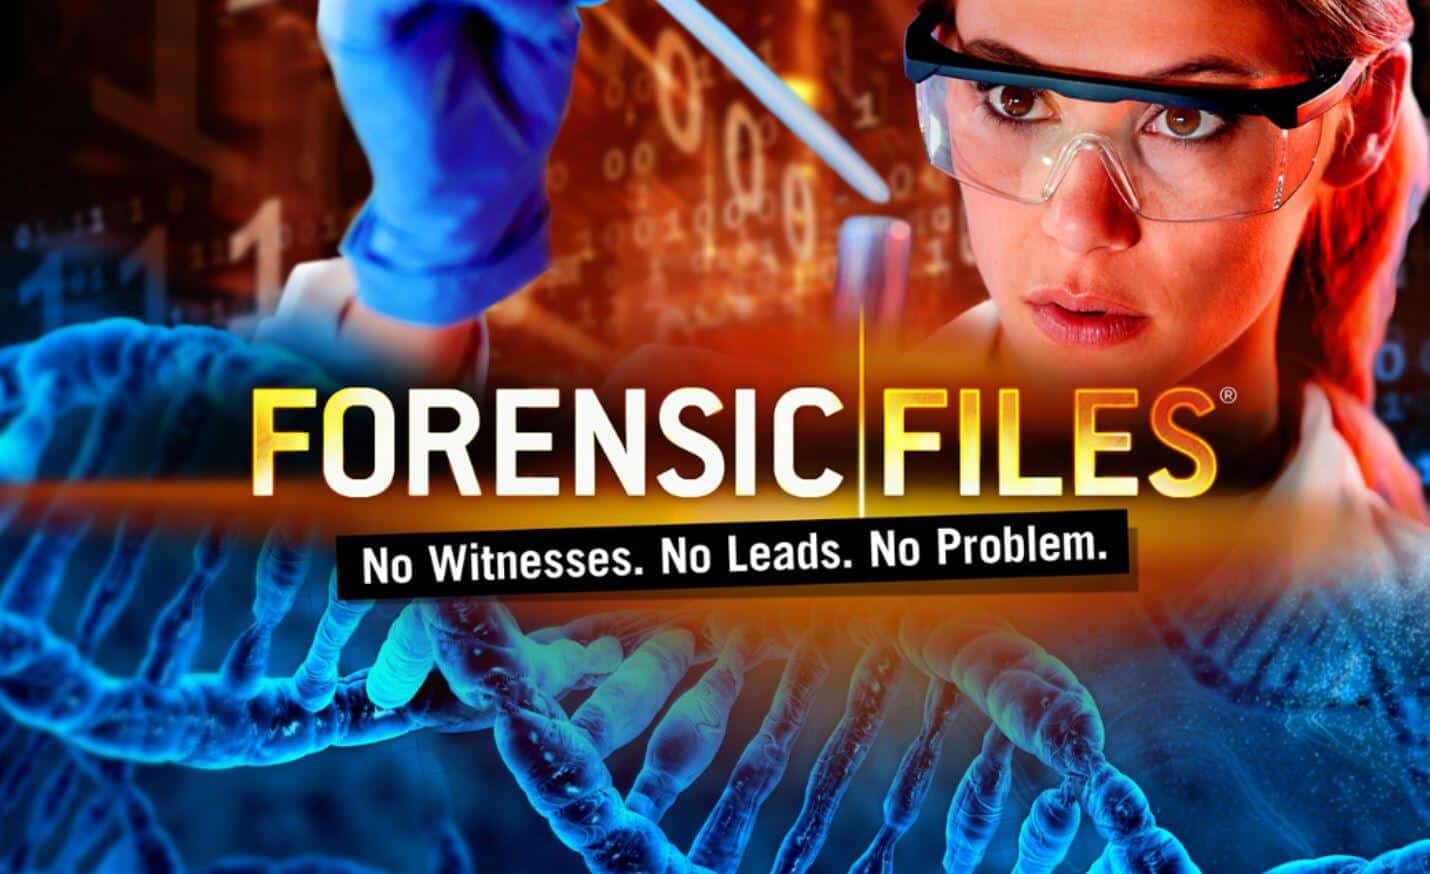 New 'Forensic Files' Episodes Coming To HLN In 2020